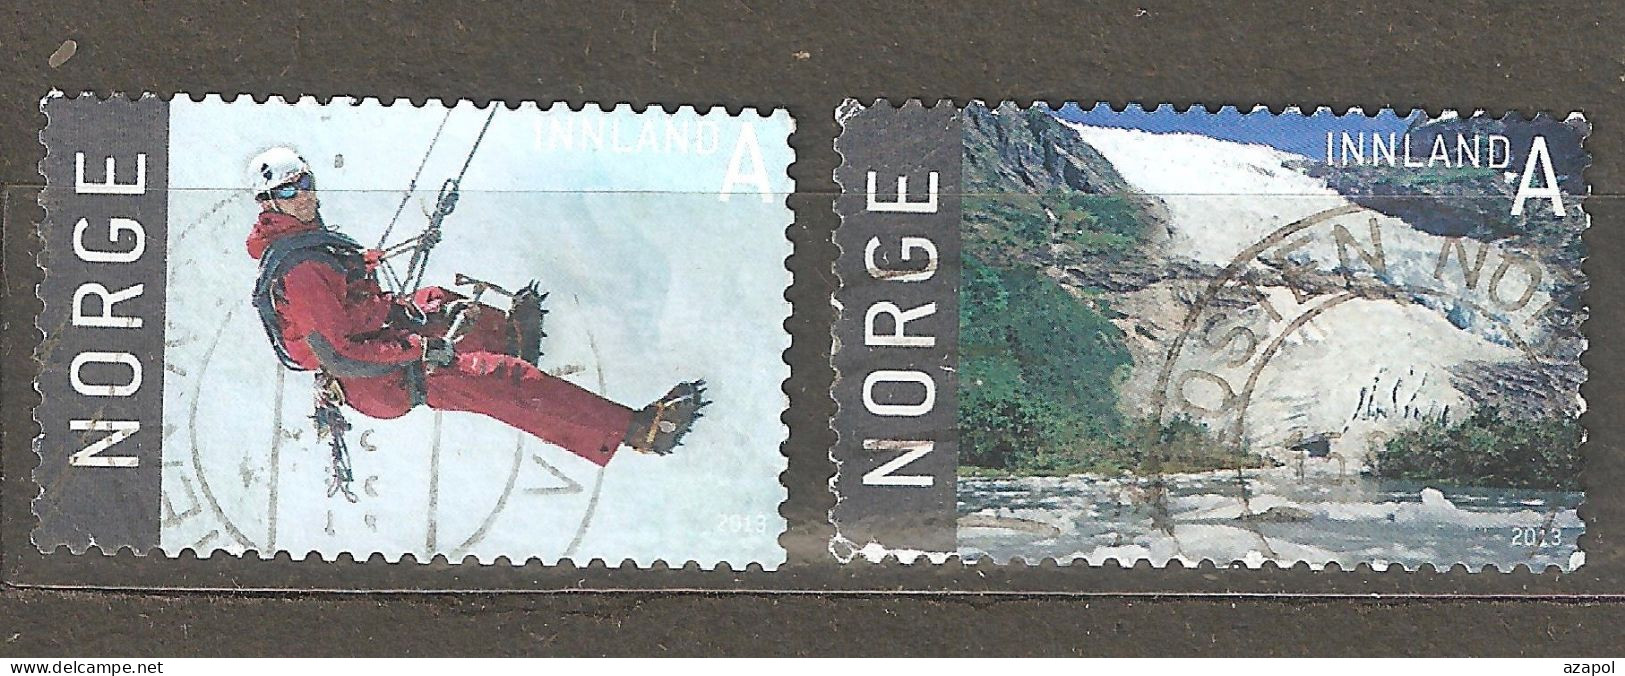 Norway: 2 Used Stamps From A Set, Tourism-a Climber On A Gletcher, Waterfall, 2013, Mi#1809-10 - Gebruikt